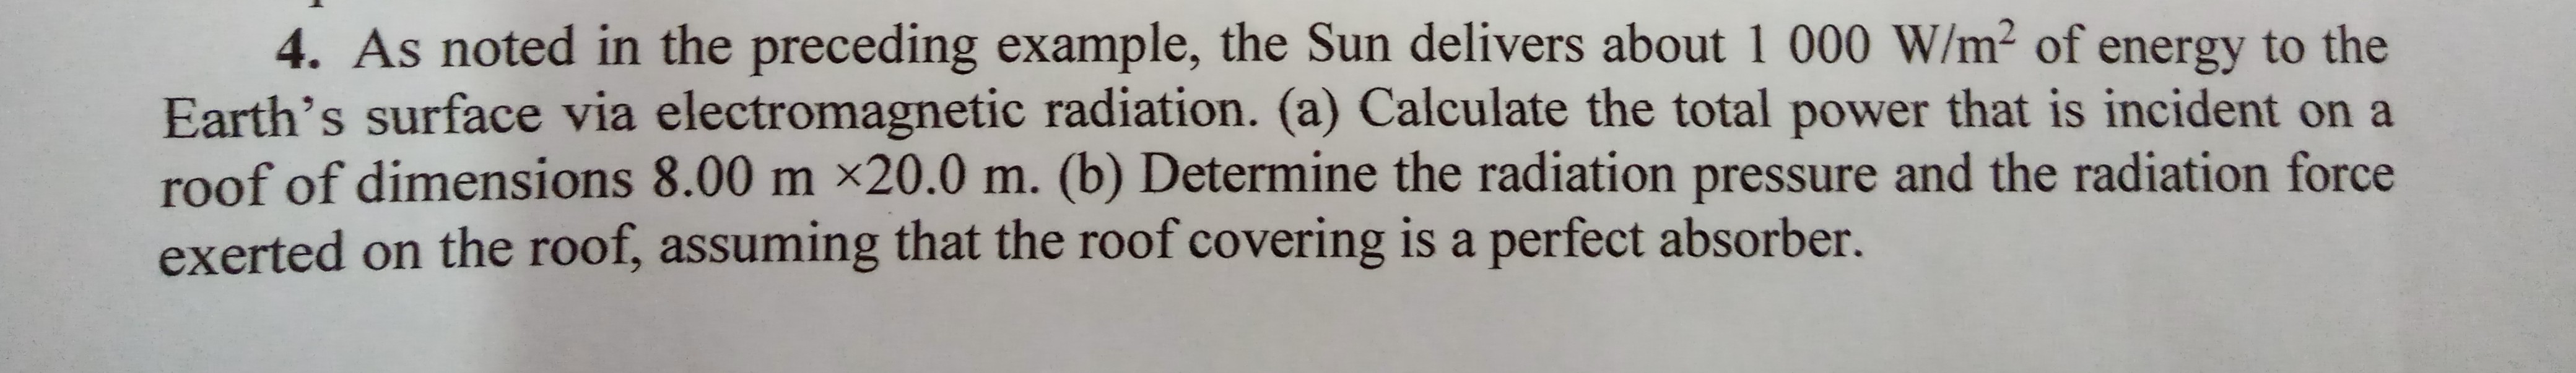 4. As noted in the preceding example, the Sun delivers about 1 000 W/m² of energy to the
Earth's surface via electromagnetic radiation. (a) Calculate the total power that is incident on a
roof of dimensions 8.00 m ×20.0 m. (b) Determine the radiation pressure and the radiation force
exerted on the roof, assuming that the roof covering is a perfect absorber.
